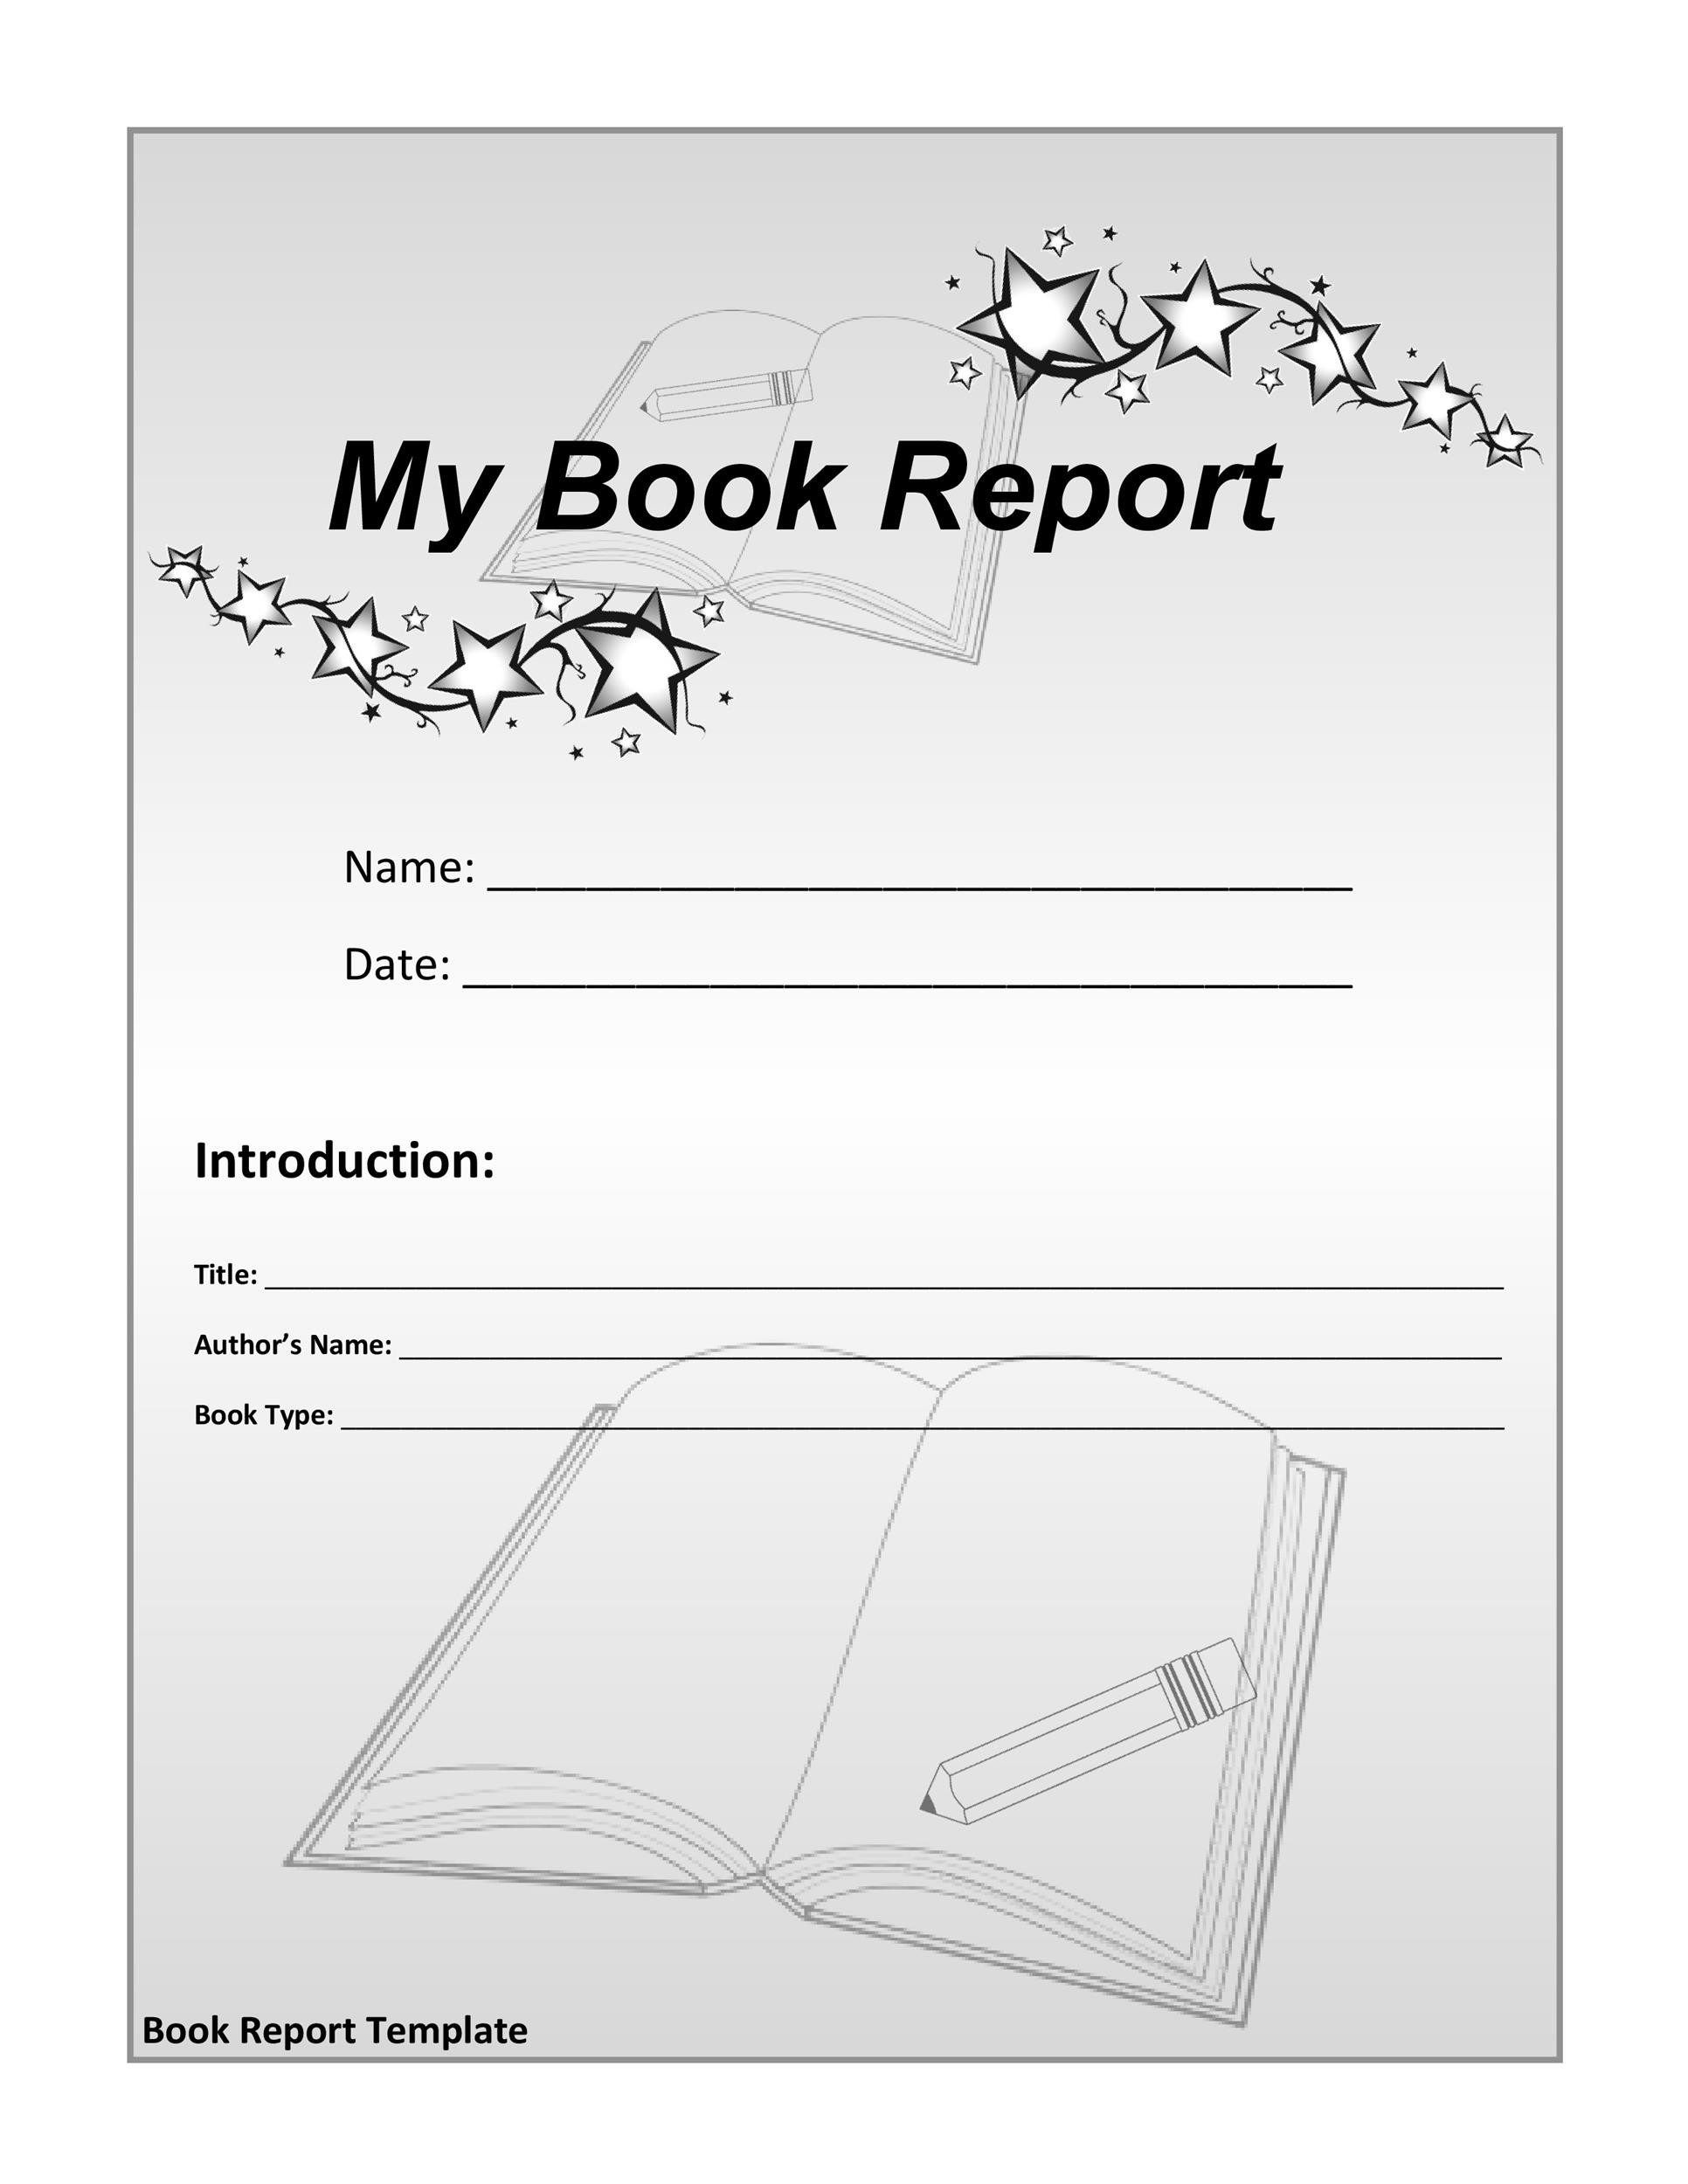 book report cover page